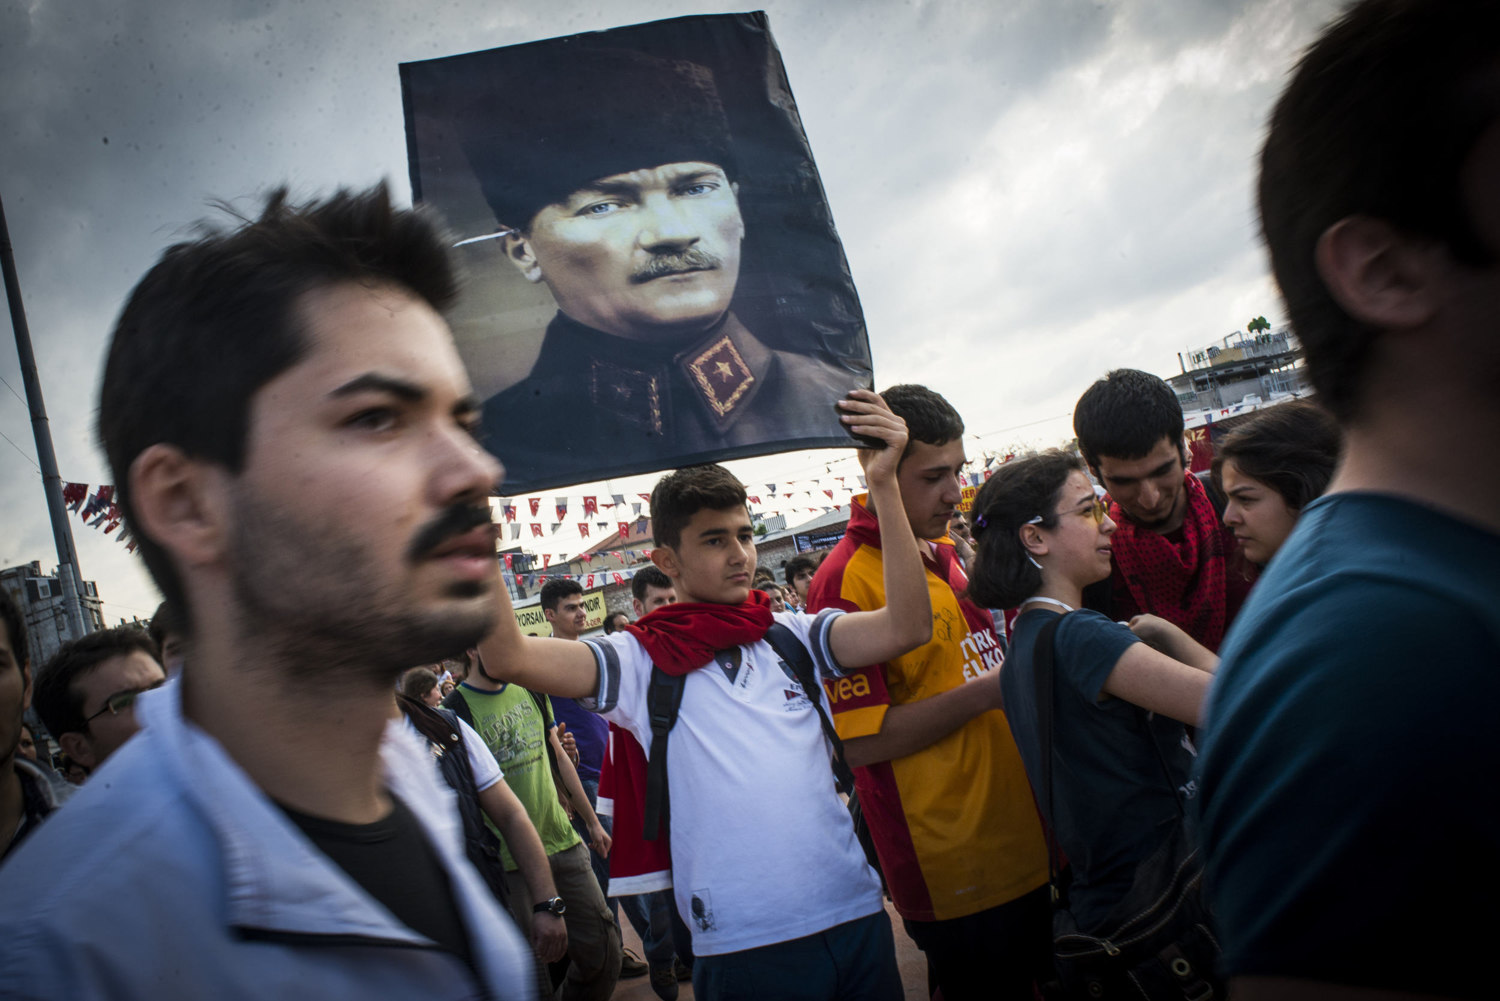  A boy holds up a portrait of former leader Mustafa Kemal Ataturk in Taksim Square,  where yesterdays clashes occurred, June 2, 2013. 